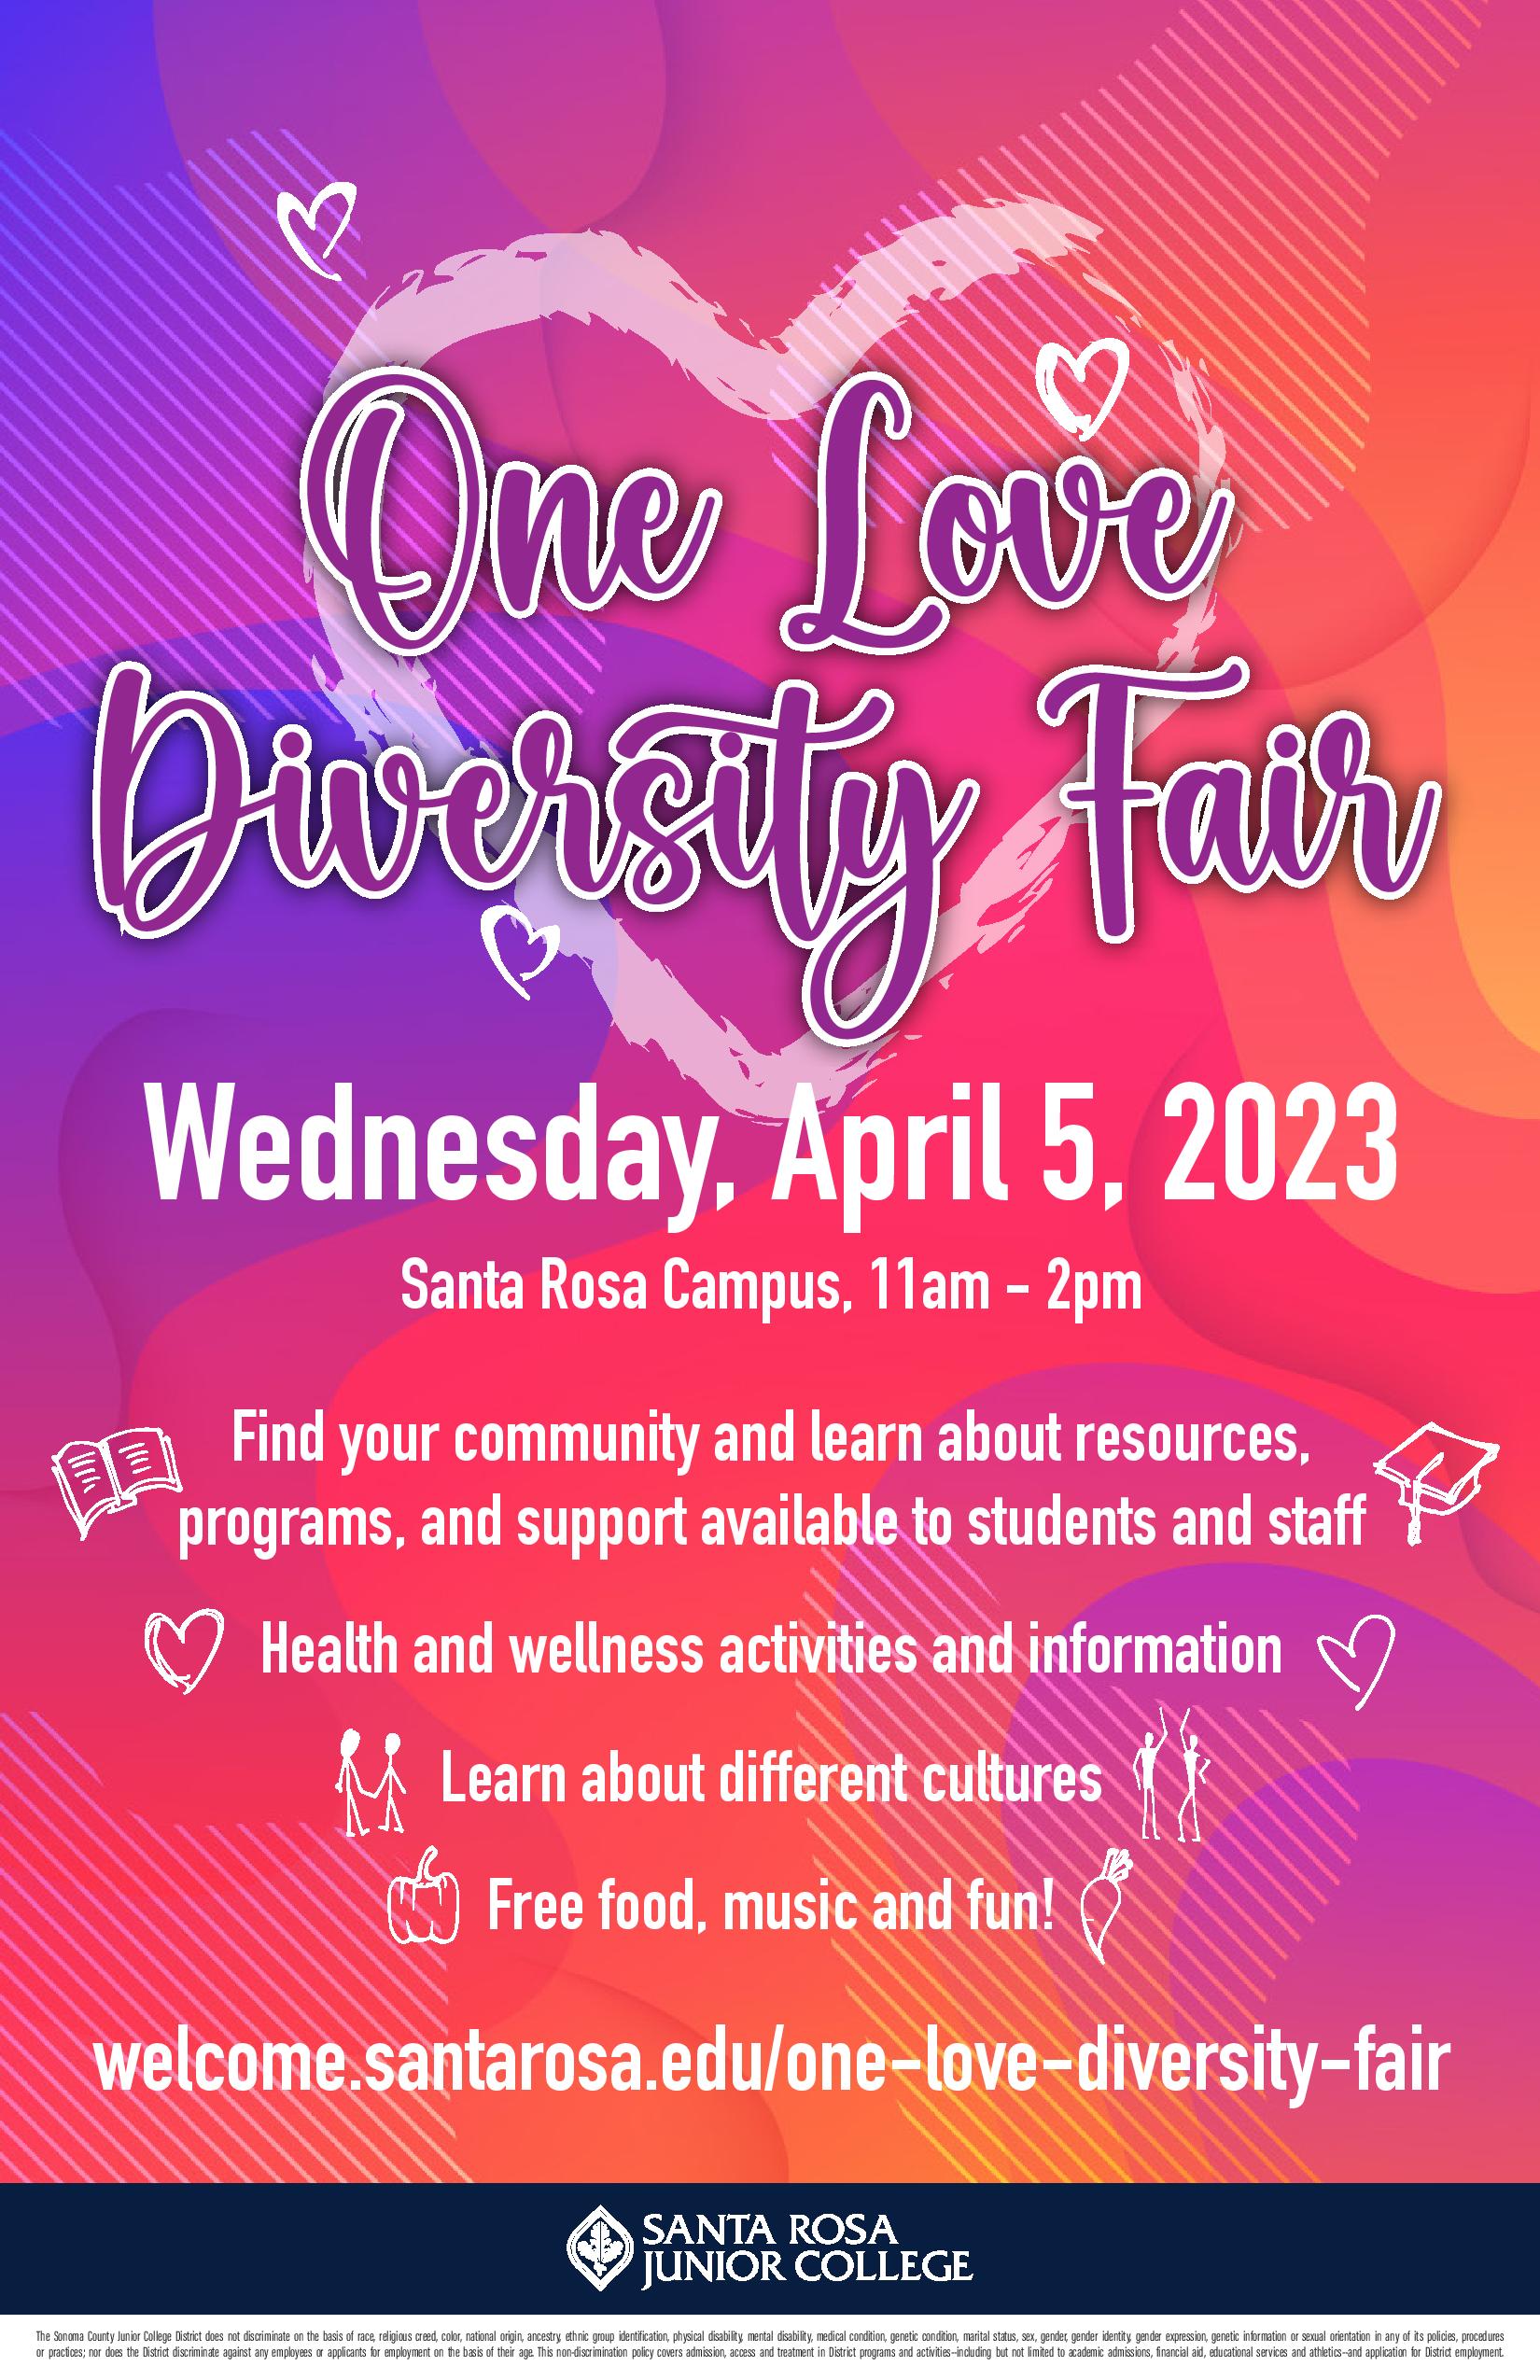 One Love Diversity Fair, Wednesday, April 5, 2023 Santa Rosa Campus, 11am - 2pm Find your community and learn about resources, programs, and support available to students and staff Health and wellness activities and information Learn about different cultures Free food, music and fun! welcome.santarosa.edu/one-love-diversity-fair 